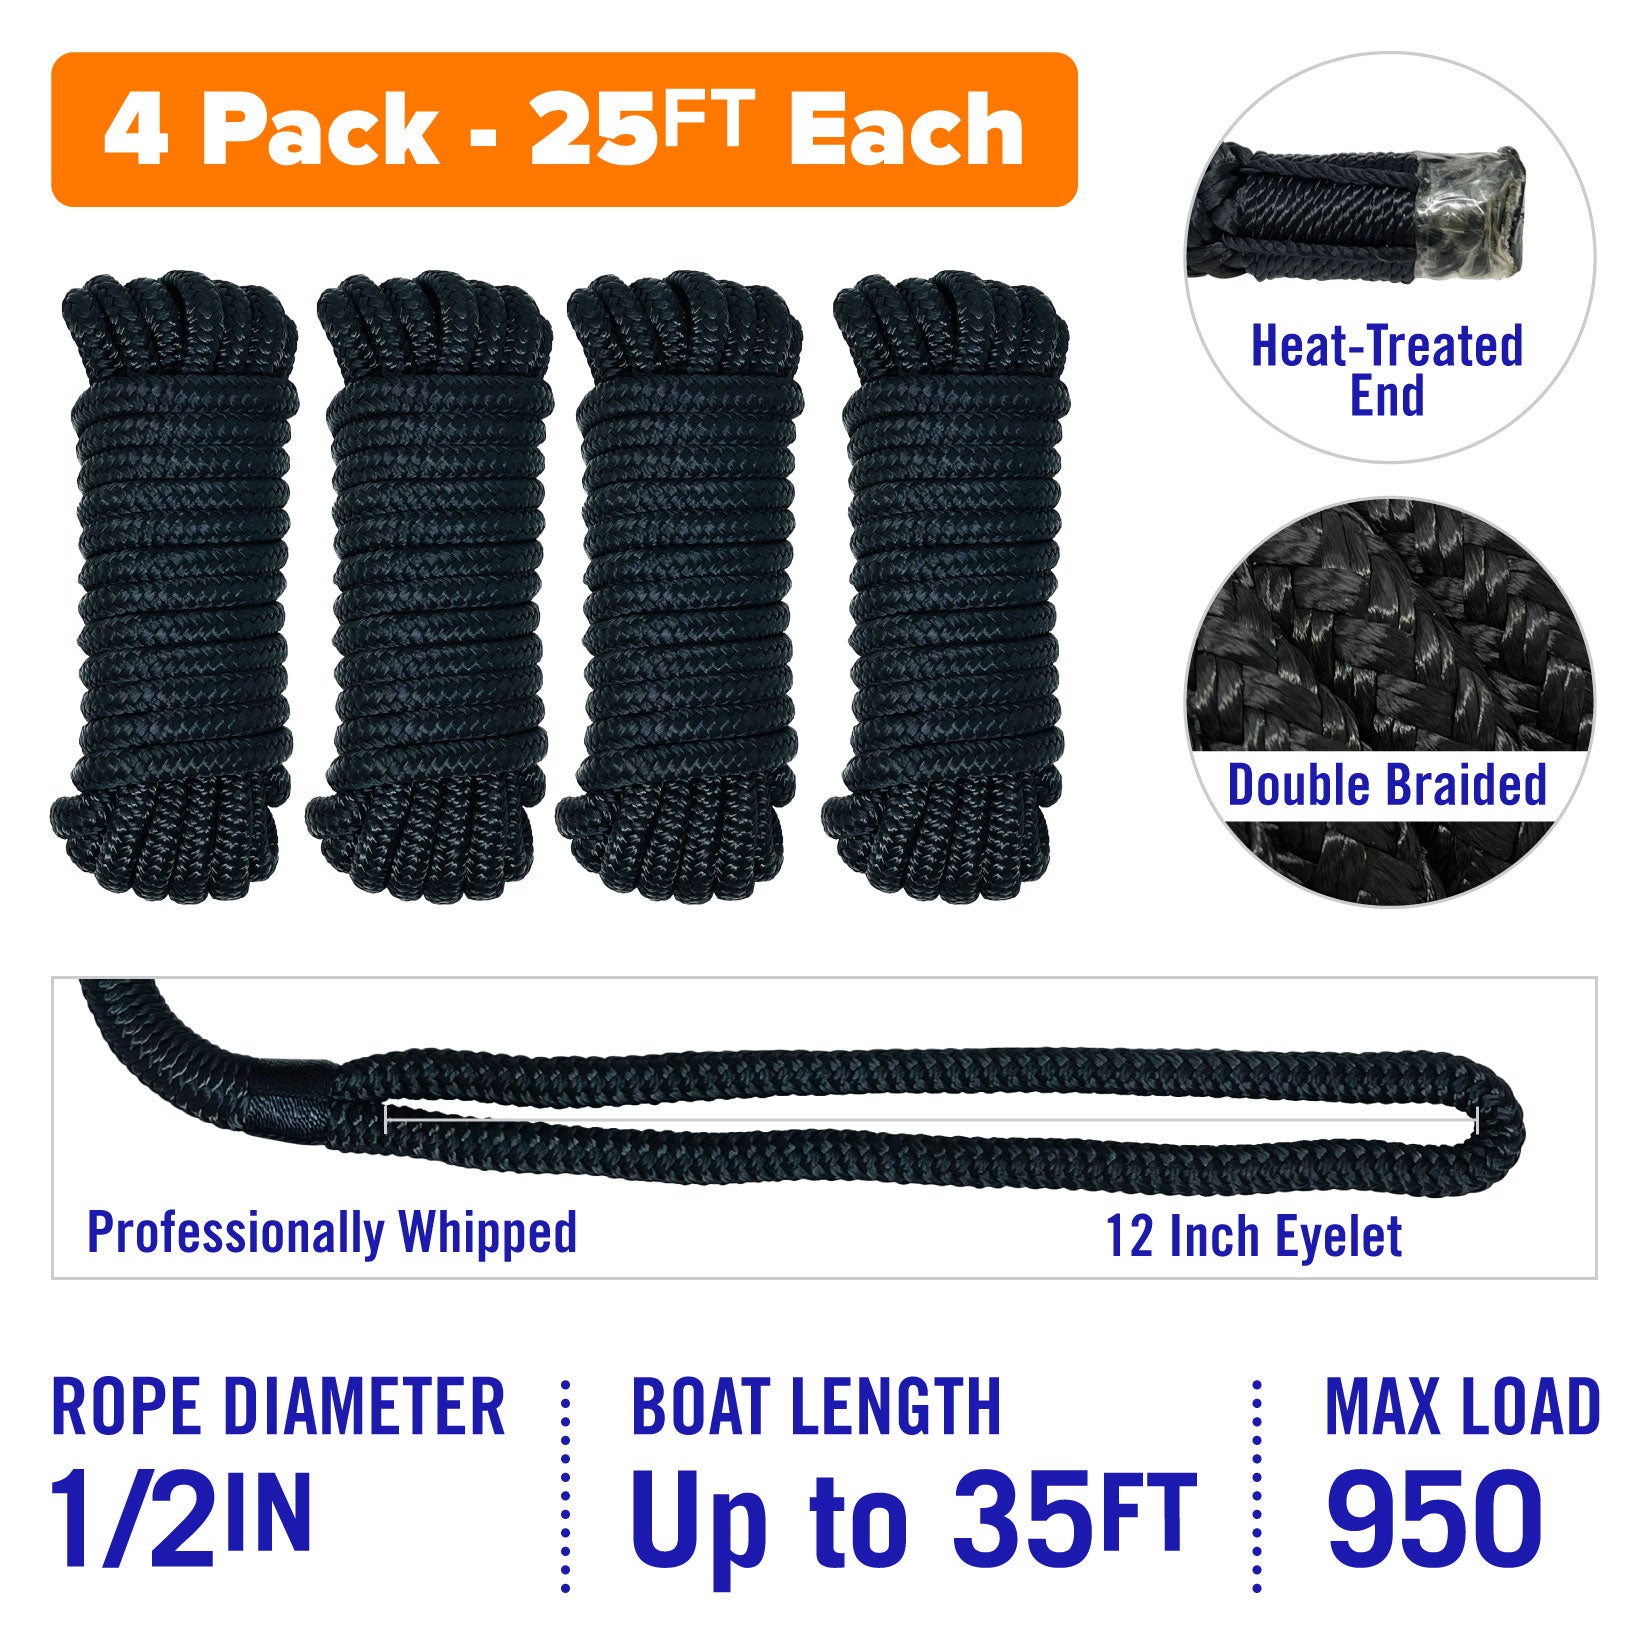 Boat Dock Lines & Rope Boat Ropes for Docking 1/2 Line Braided Mooring Marine Rope 25ft 1/2 inch Nylon Rope Boat Dock Lines for Docking Boat Lines